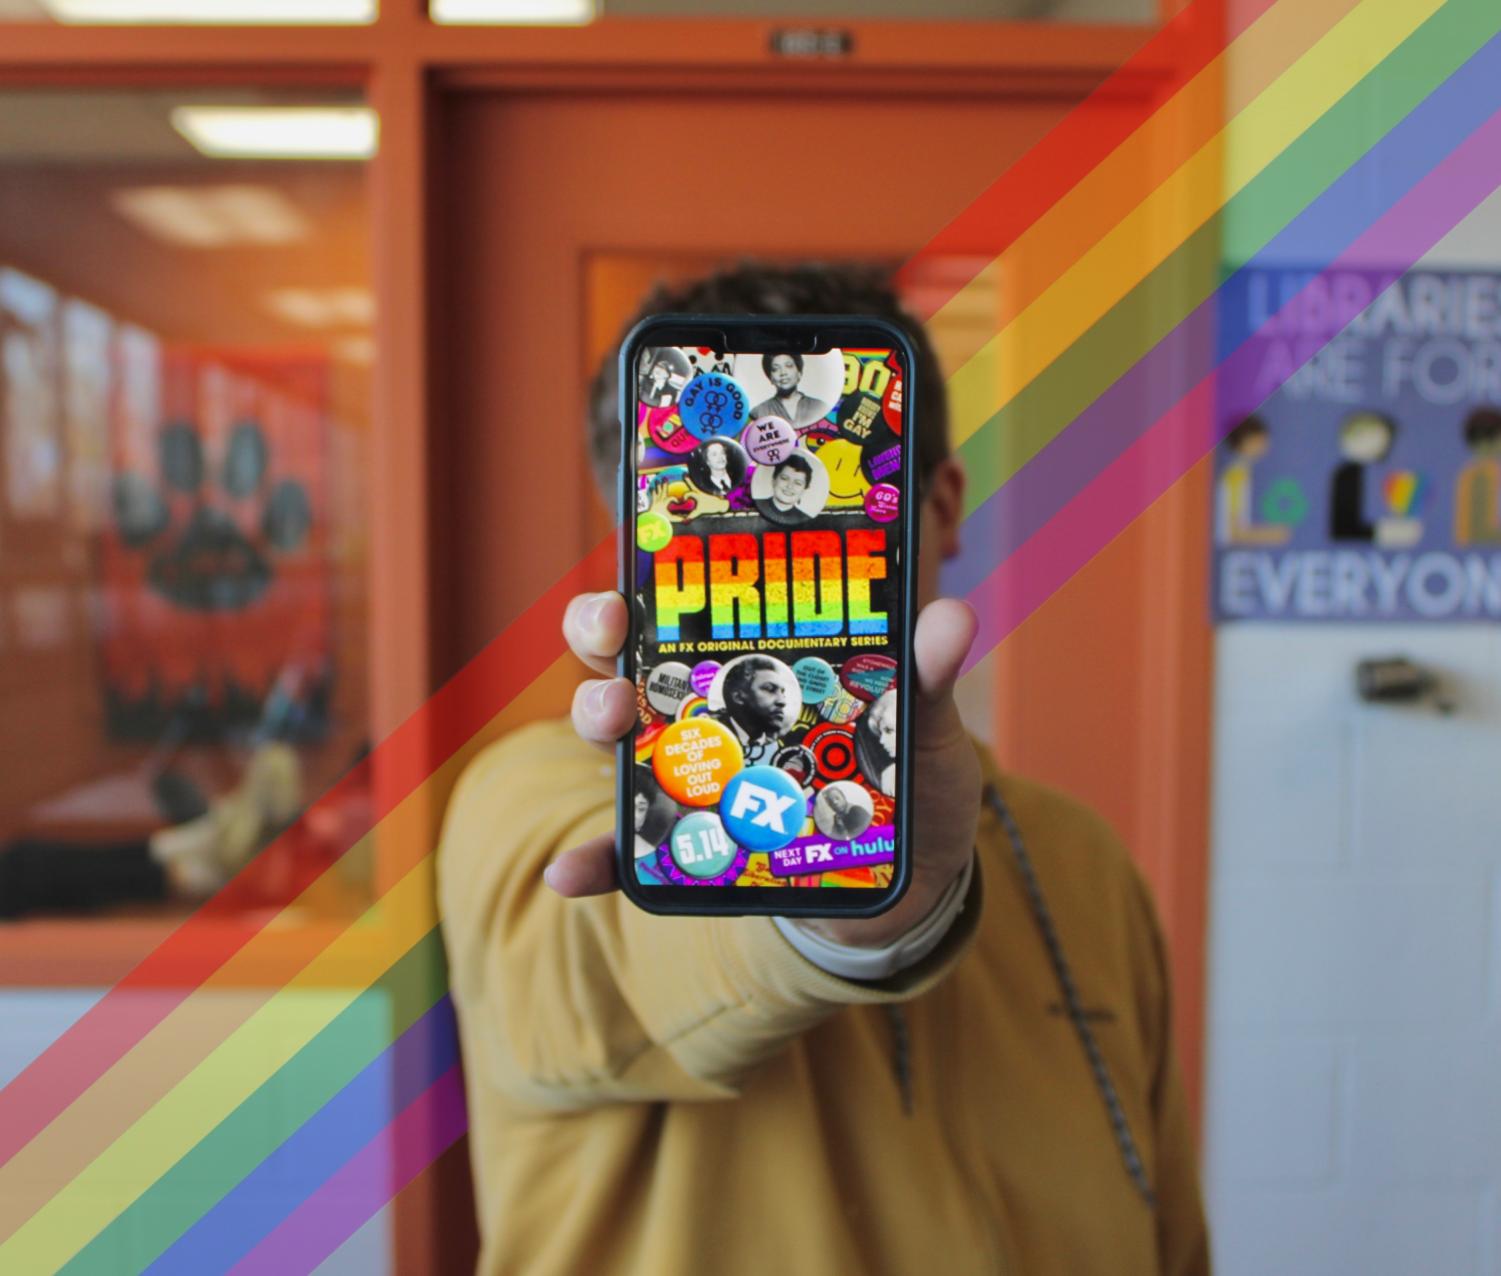 Student displays ‘PRIDE’, a Hulu documentary about the struggle for civil rights in the LGBTQ+ community.